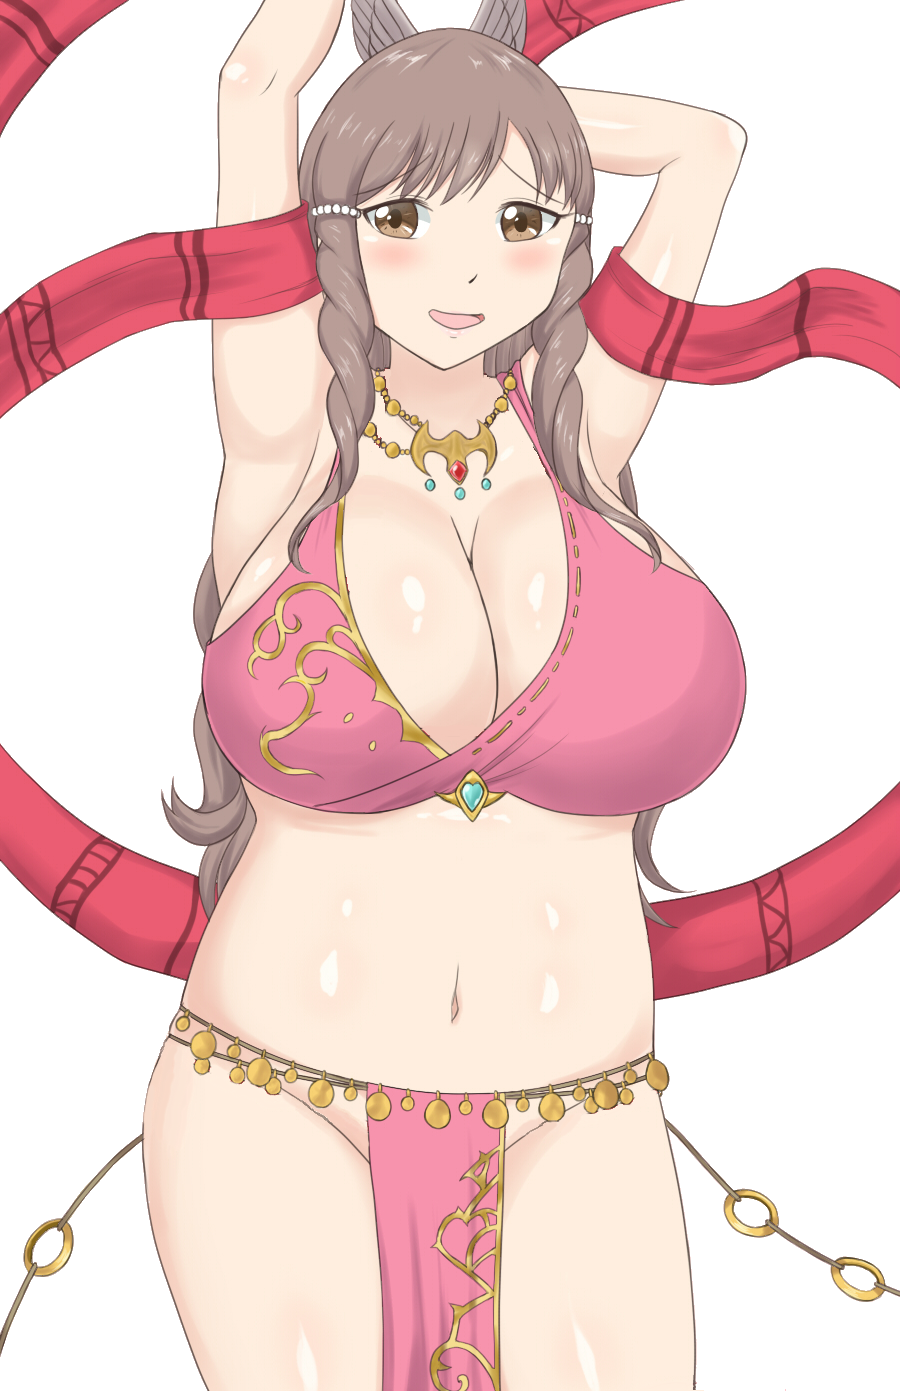 1girl beautiful big_breasts blush breasts brown_eyes brown_hair cleavage cosplay edit embarrassed exhibitionism fire_emblem fire_emblem:_awakening fire_emblem:_genealogy_of_the_holy_war fire_emblem_heroes fuckable hair_ornament hot huge_breasts insanely_hot jewelry lene_(fire_emblem) lene_(fire_emblem)_(cosplay) lonh_hair looking_at_viewer midriff milf navel necklace nice_body nintendo no_bra no_panties no_underwear open_mouth photoshop plump raigarasu revealing_clothes sexy smile sumia sumia_(fire_emblem) tagme thick_thighs thighs